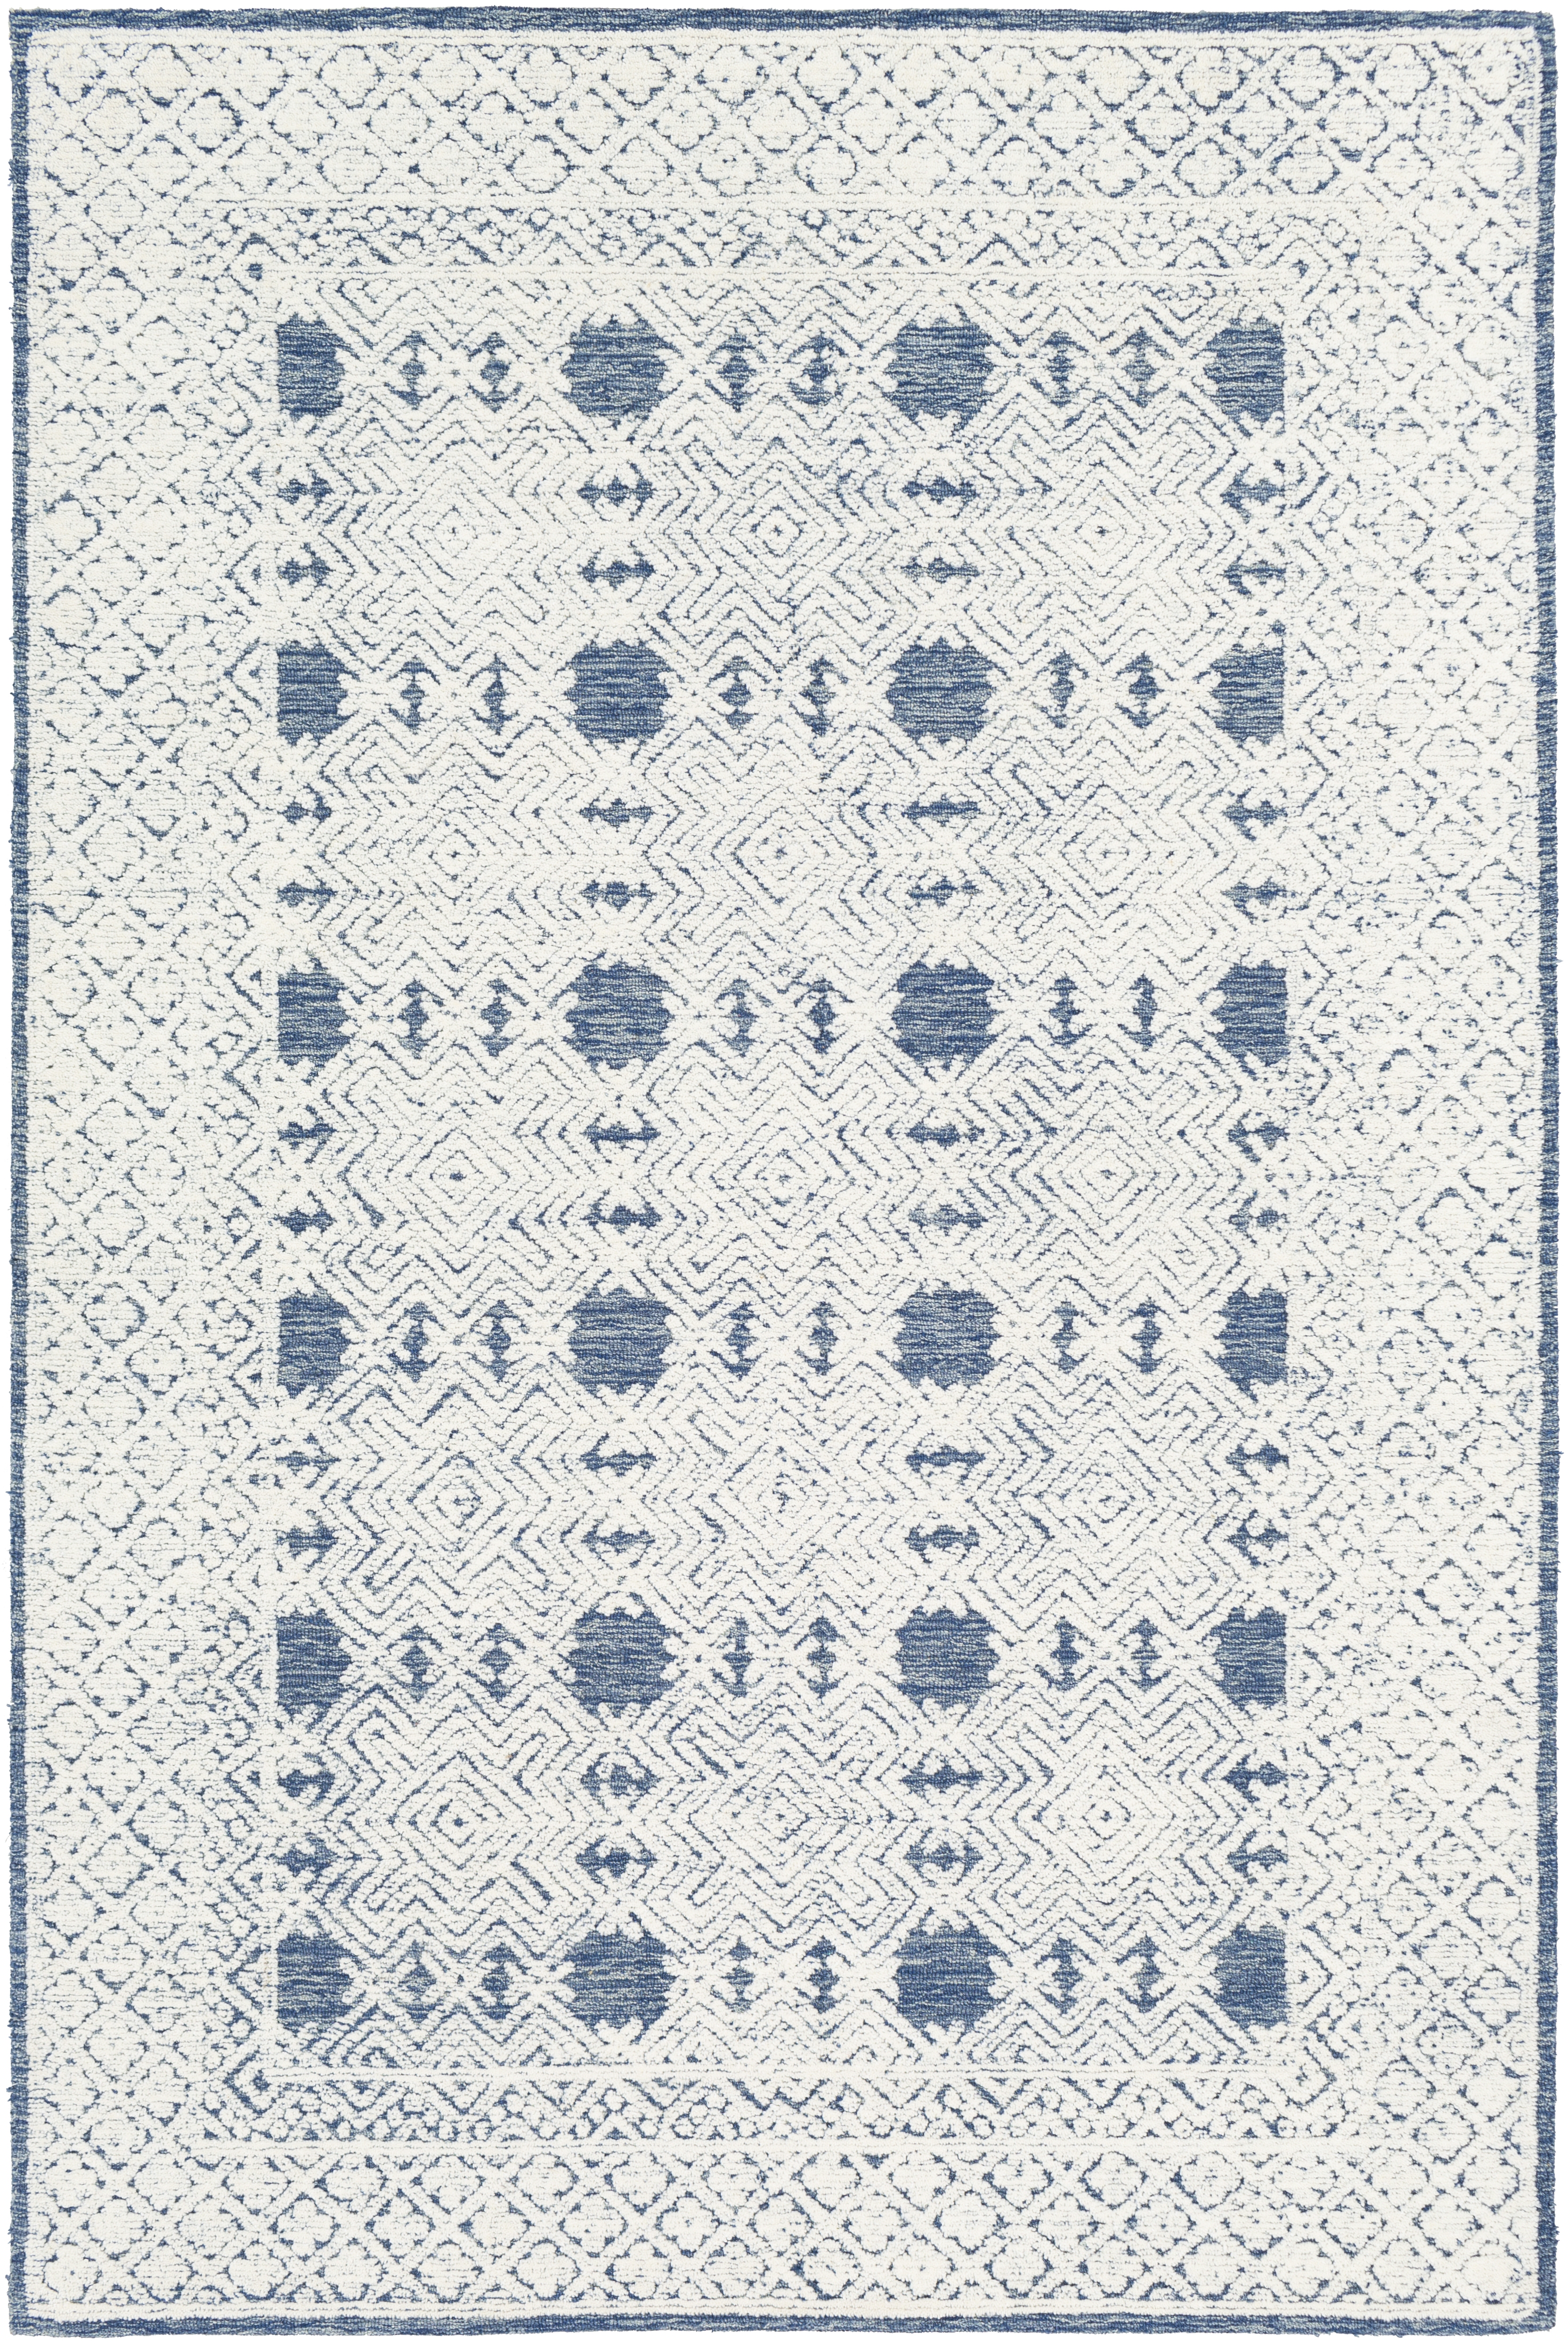 Louvre Rug, 2' x 3' - Image 0